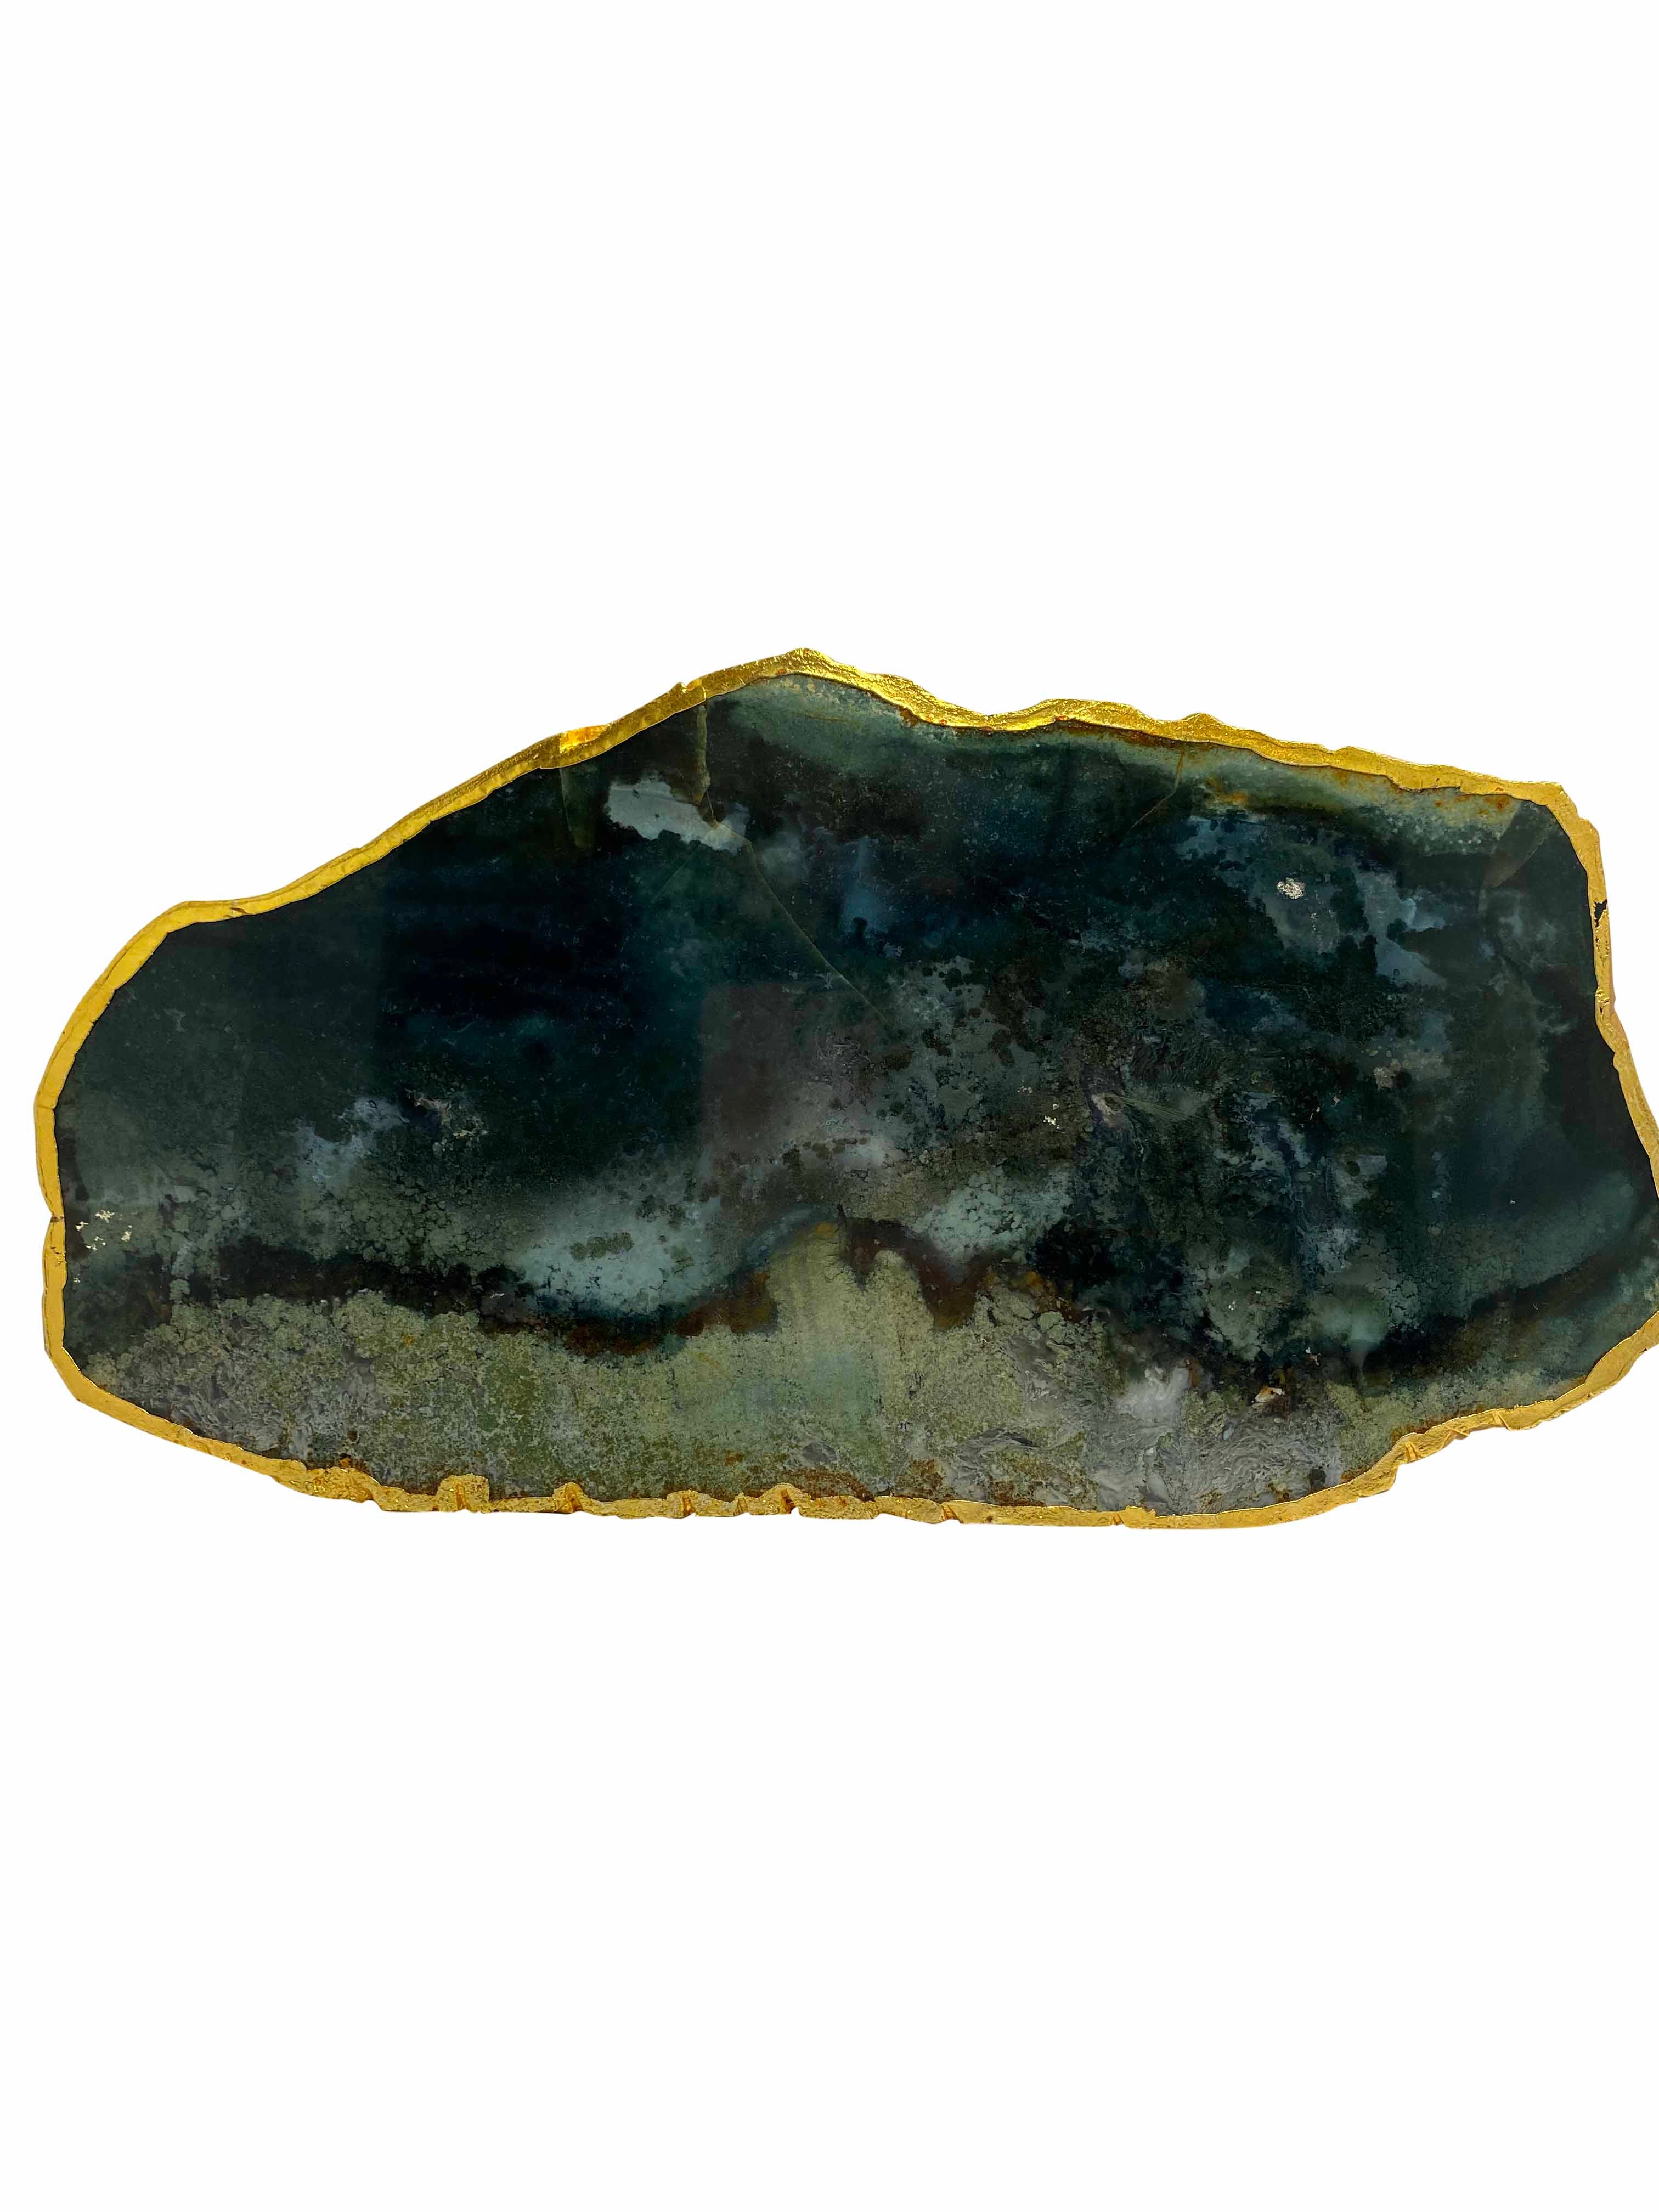 Moss Agate Crystal Plater C - 1.6KG